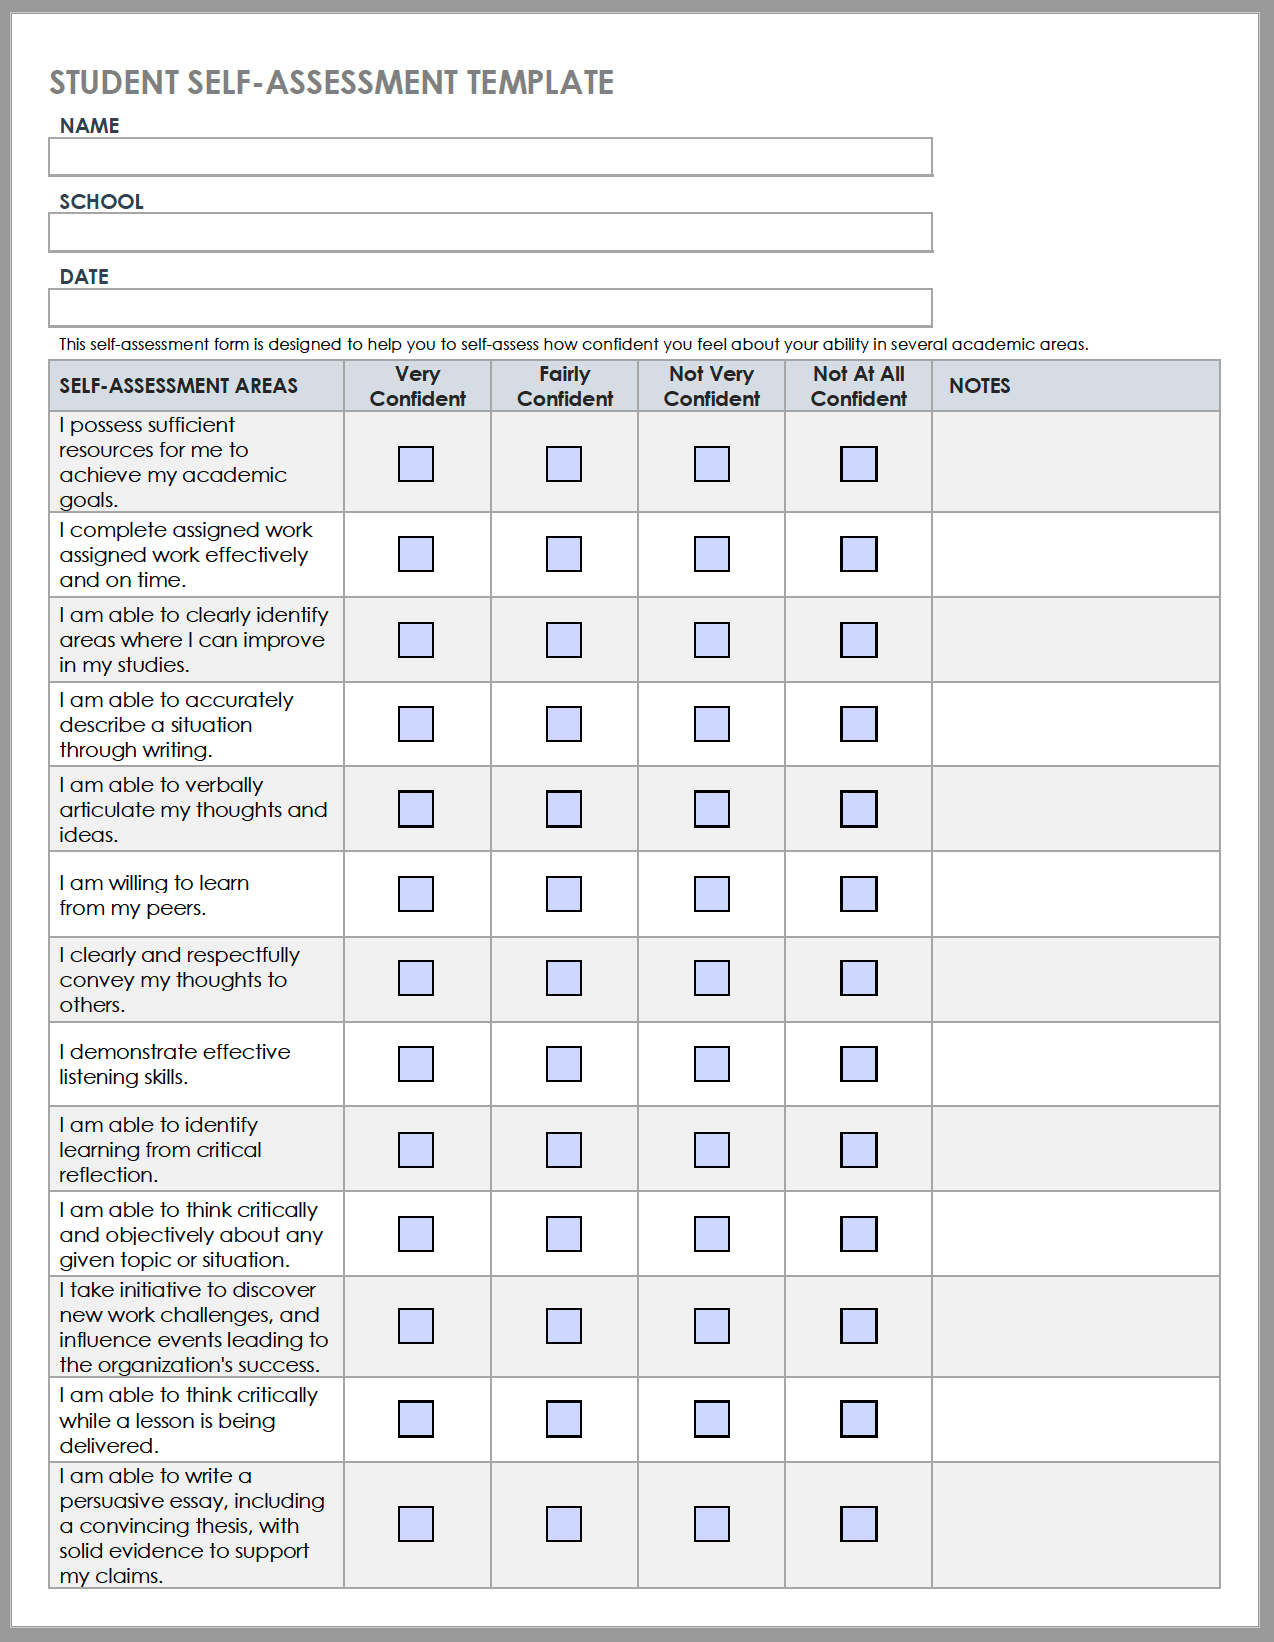 Employee Self Assessment Template For Your Needs